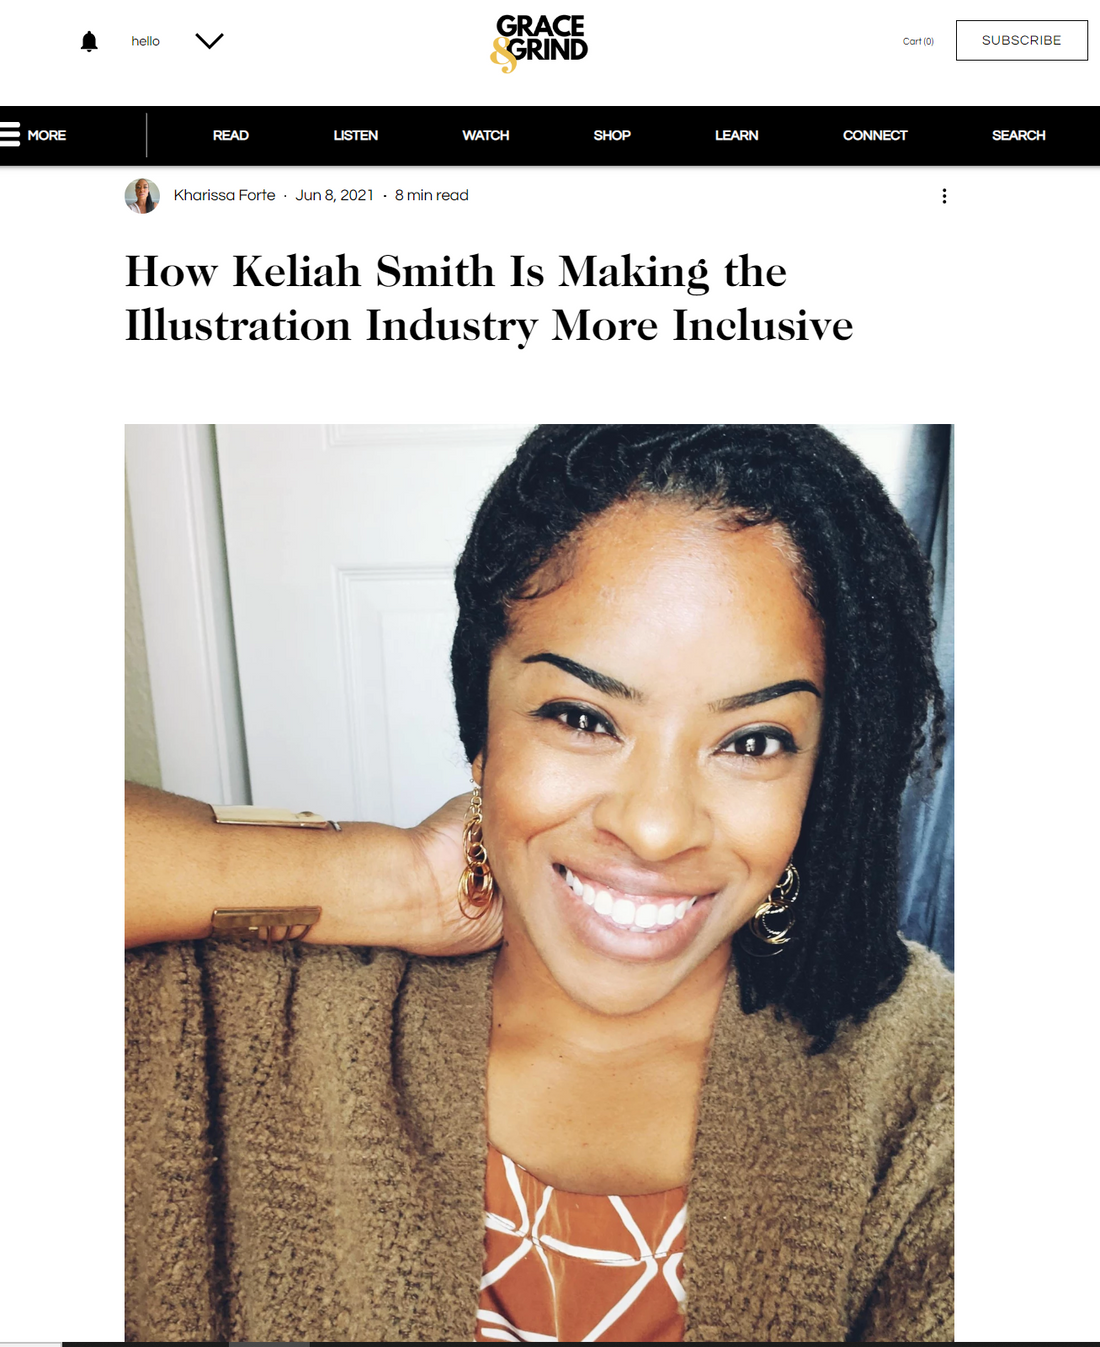 2021 Feature of Grace&Grind | How Keliah Smith Is Making the Illustration Industry More Inclusive!